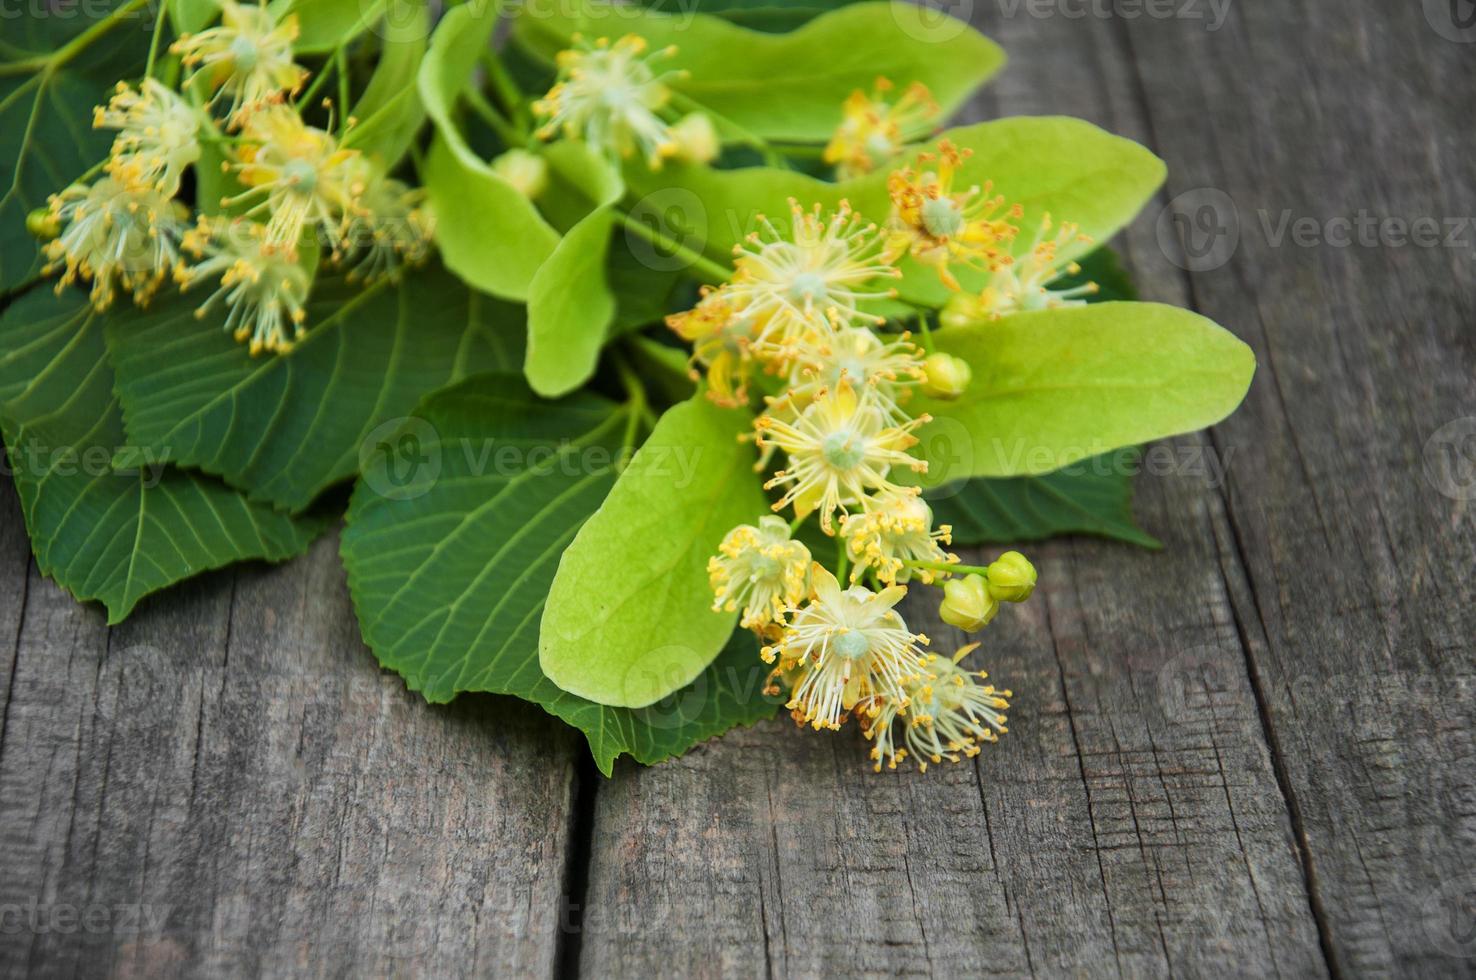 Linden flowers on the table photo